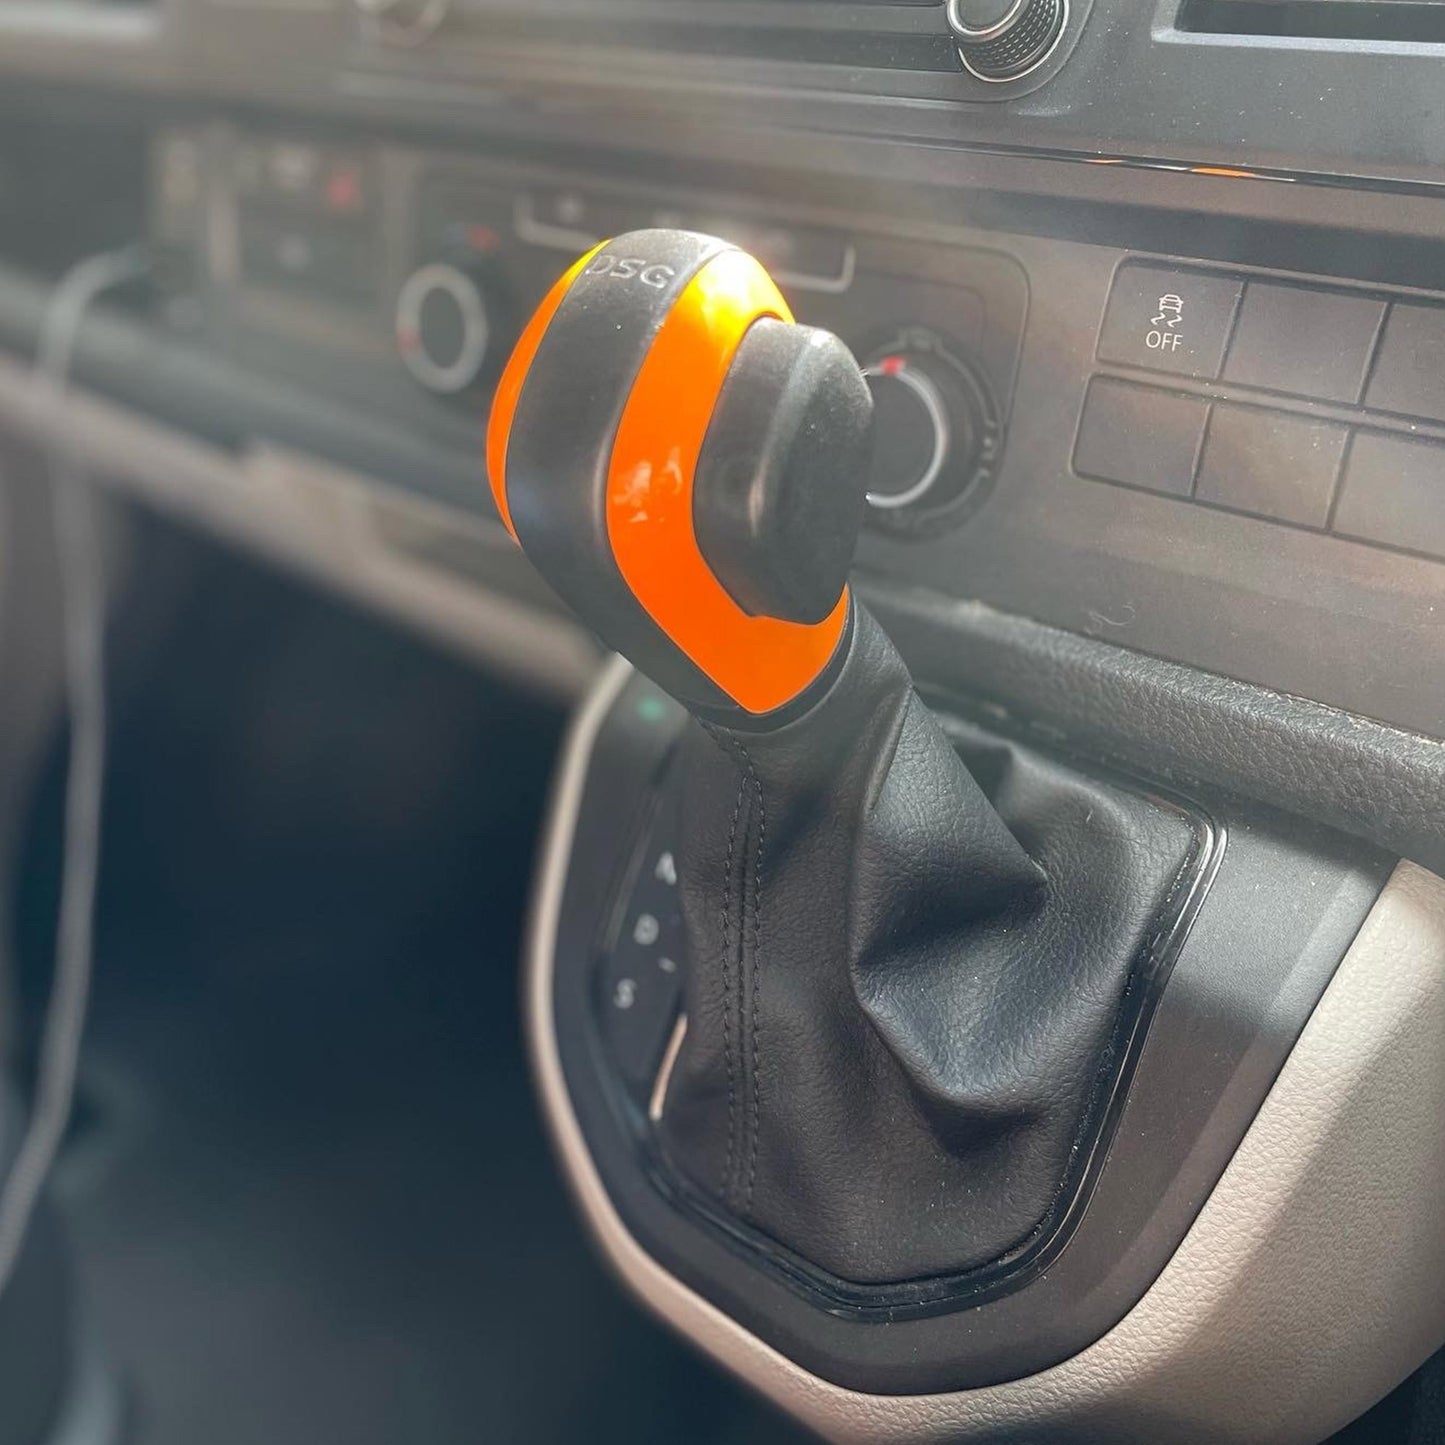 VW T6 Transporter Auto/DSG Gear Knob Side Styling Caps - Orange Painted and Ready to Fit